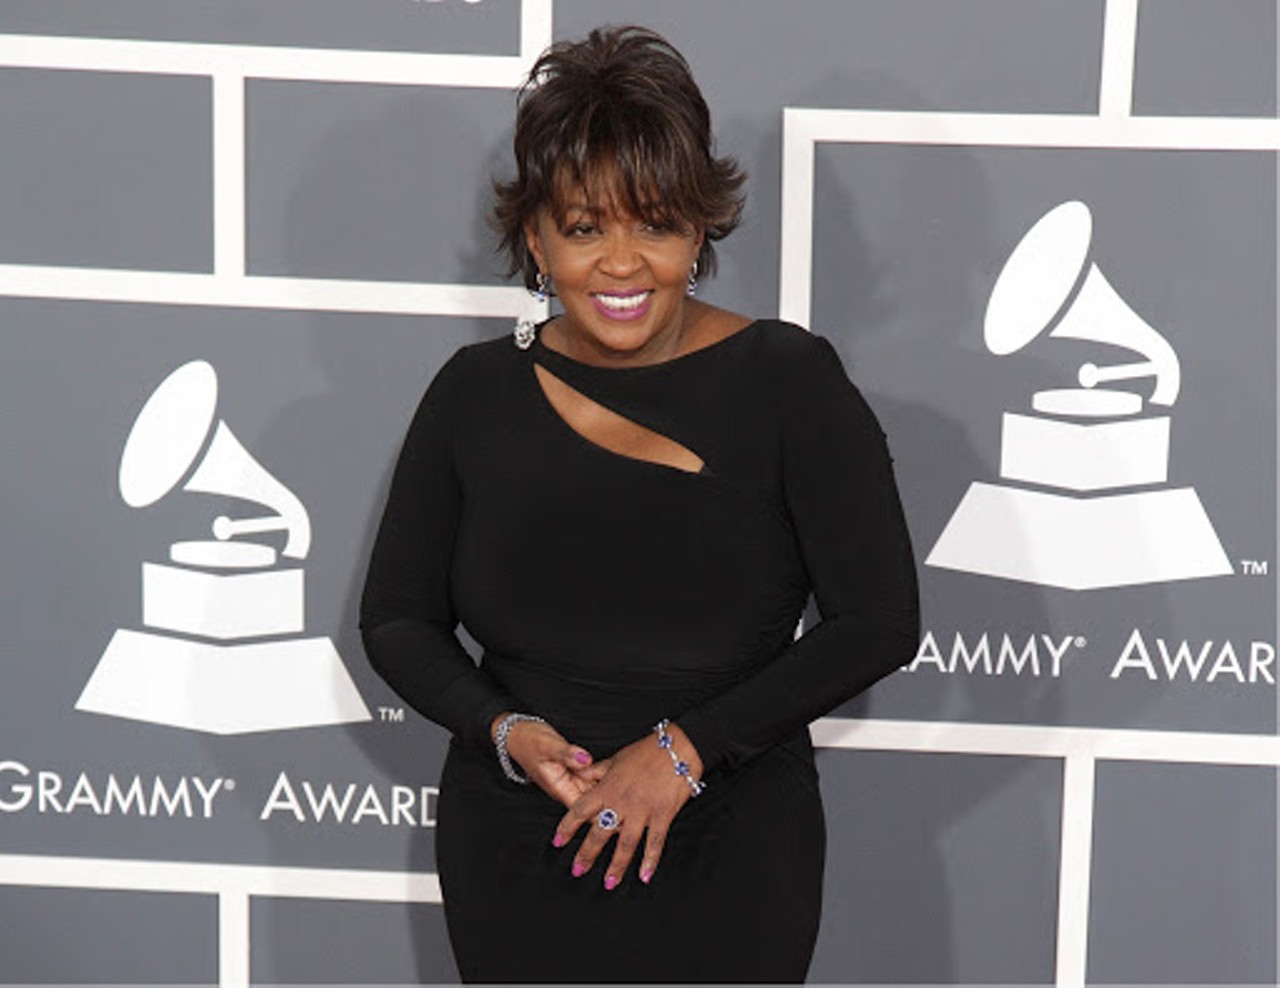 Central: Anita Baker
With many gold and platinum records as well as Grammy Awards, Anita Baker has won dozens of accolades for her contemporary R&B music. The star attended the city’s oldest public high school, Central High School, which was founded in 1858.